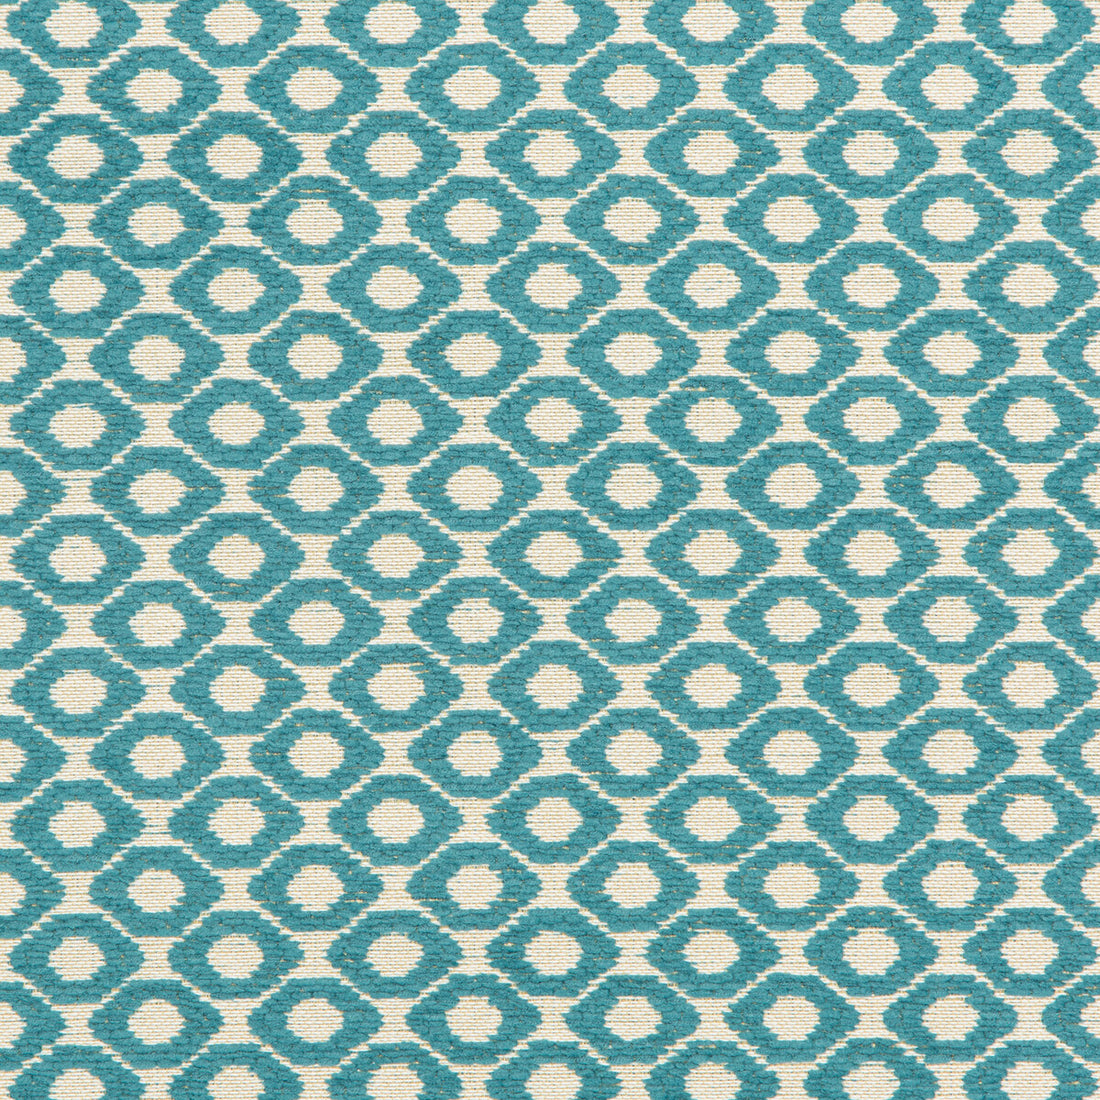 Pave The Way fabric in lagoon color - pattern 35867.35.0 - by Kravet Contract in the Gis Crypton collection